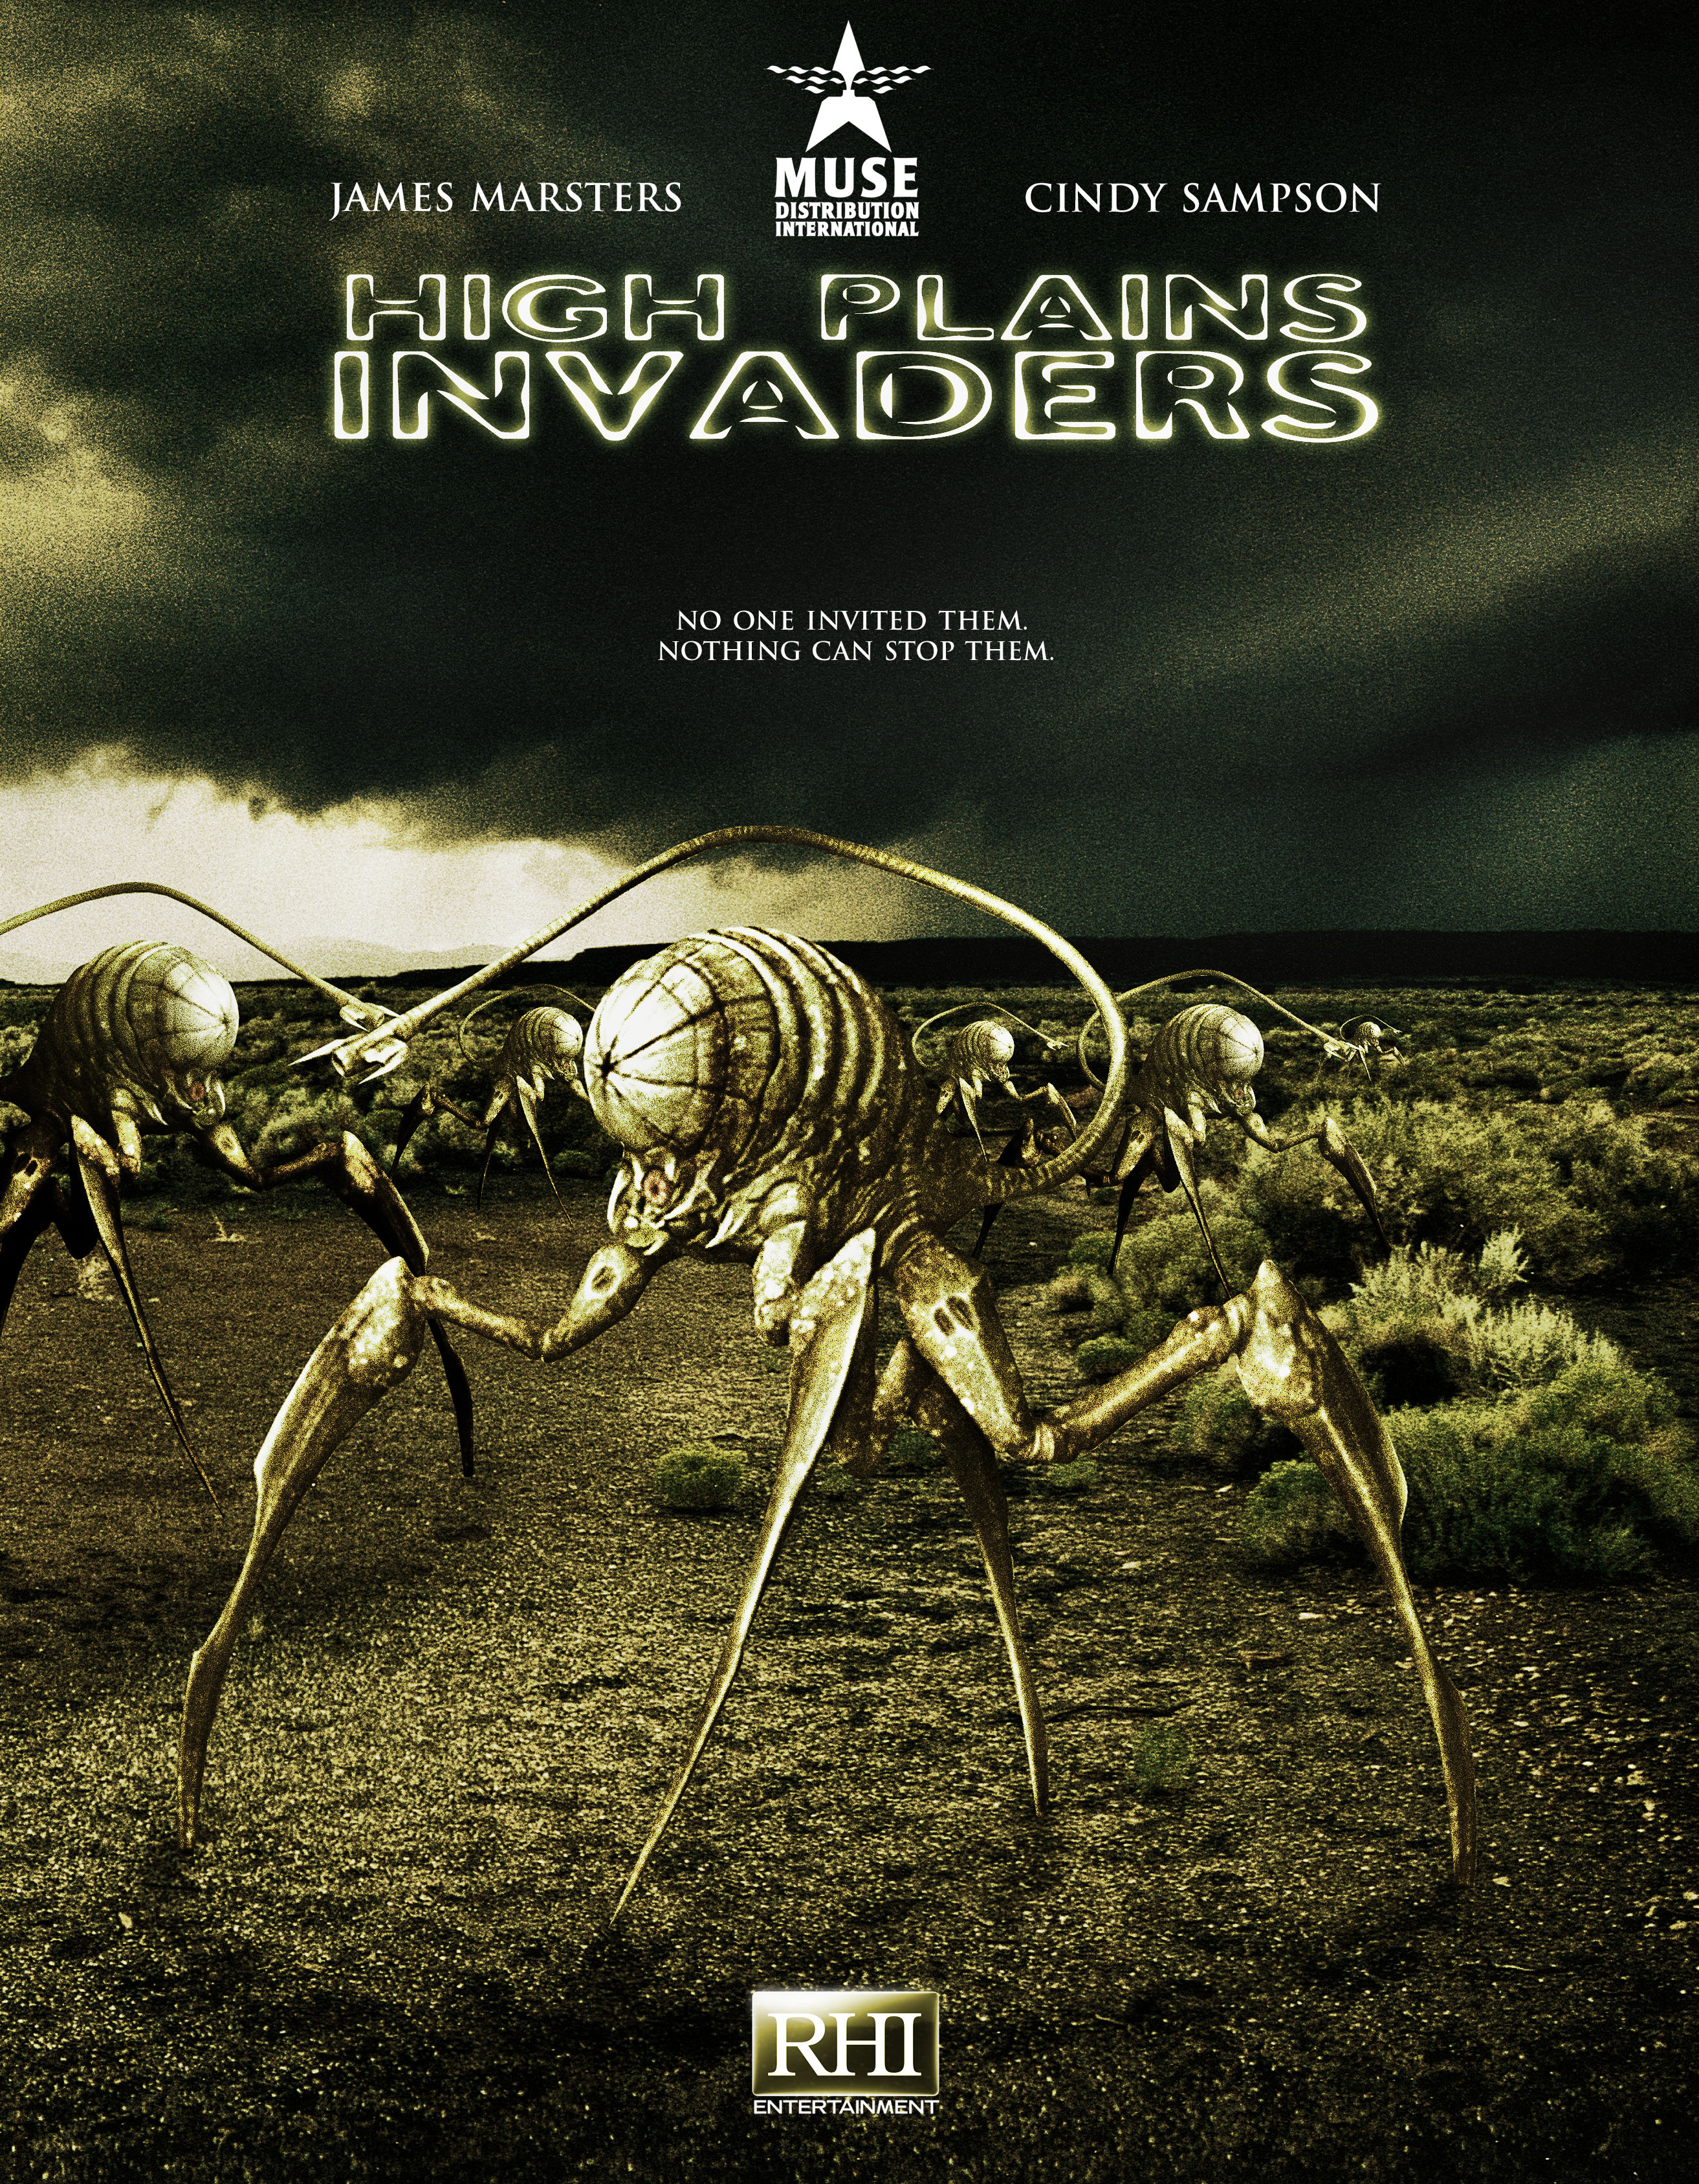 High Plains Invaders (2009) starring James Marsters on DVD on DVD